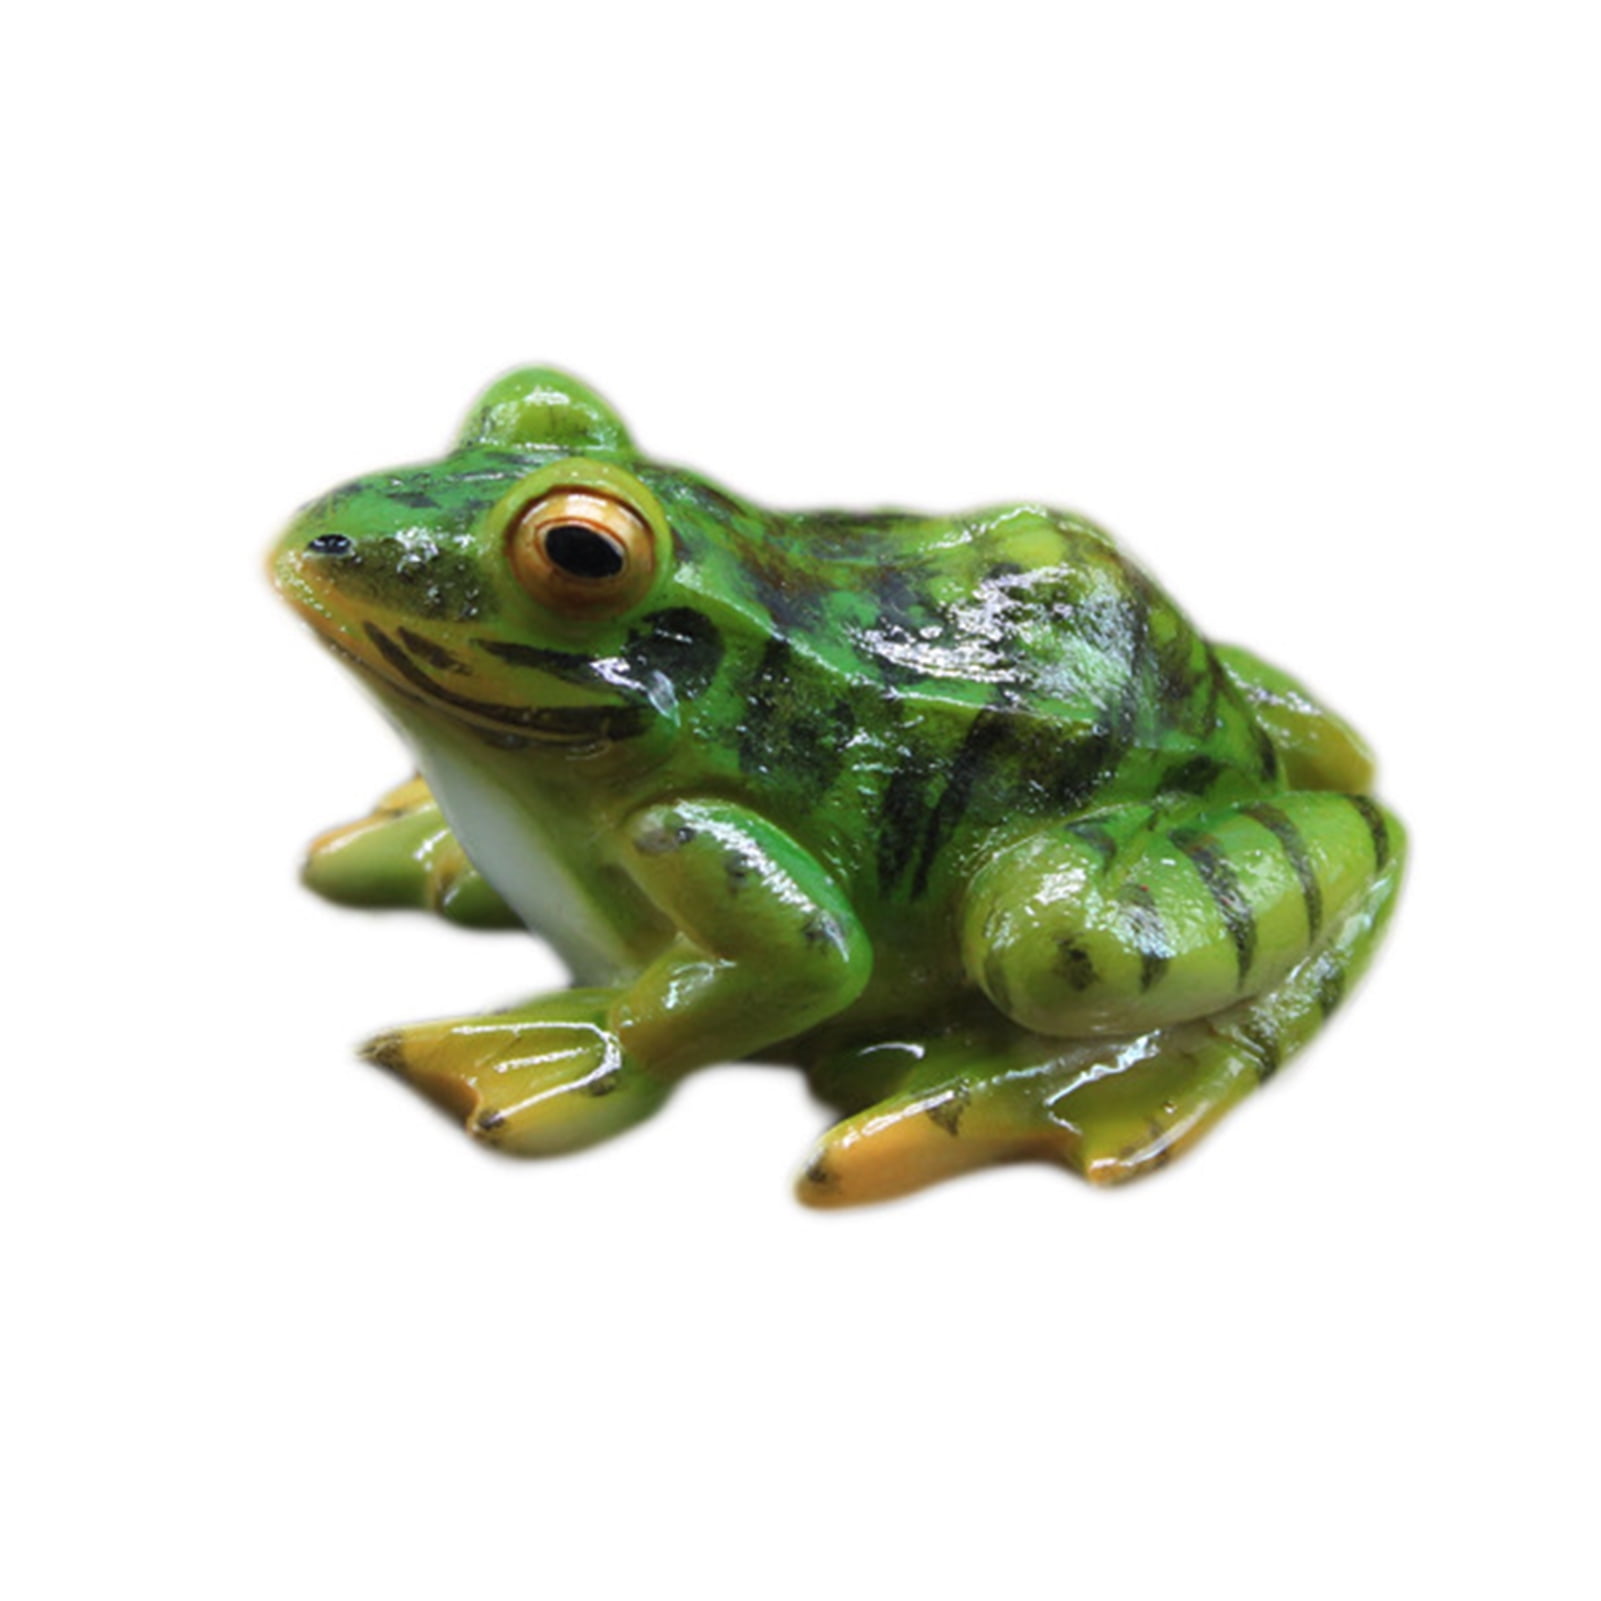 1X Green Frog Figurine Resin Colleation Gift Character Peeping Frog Desk Decor 